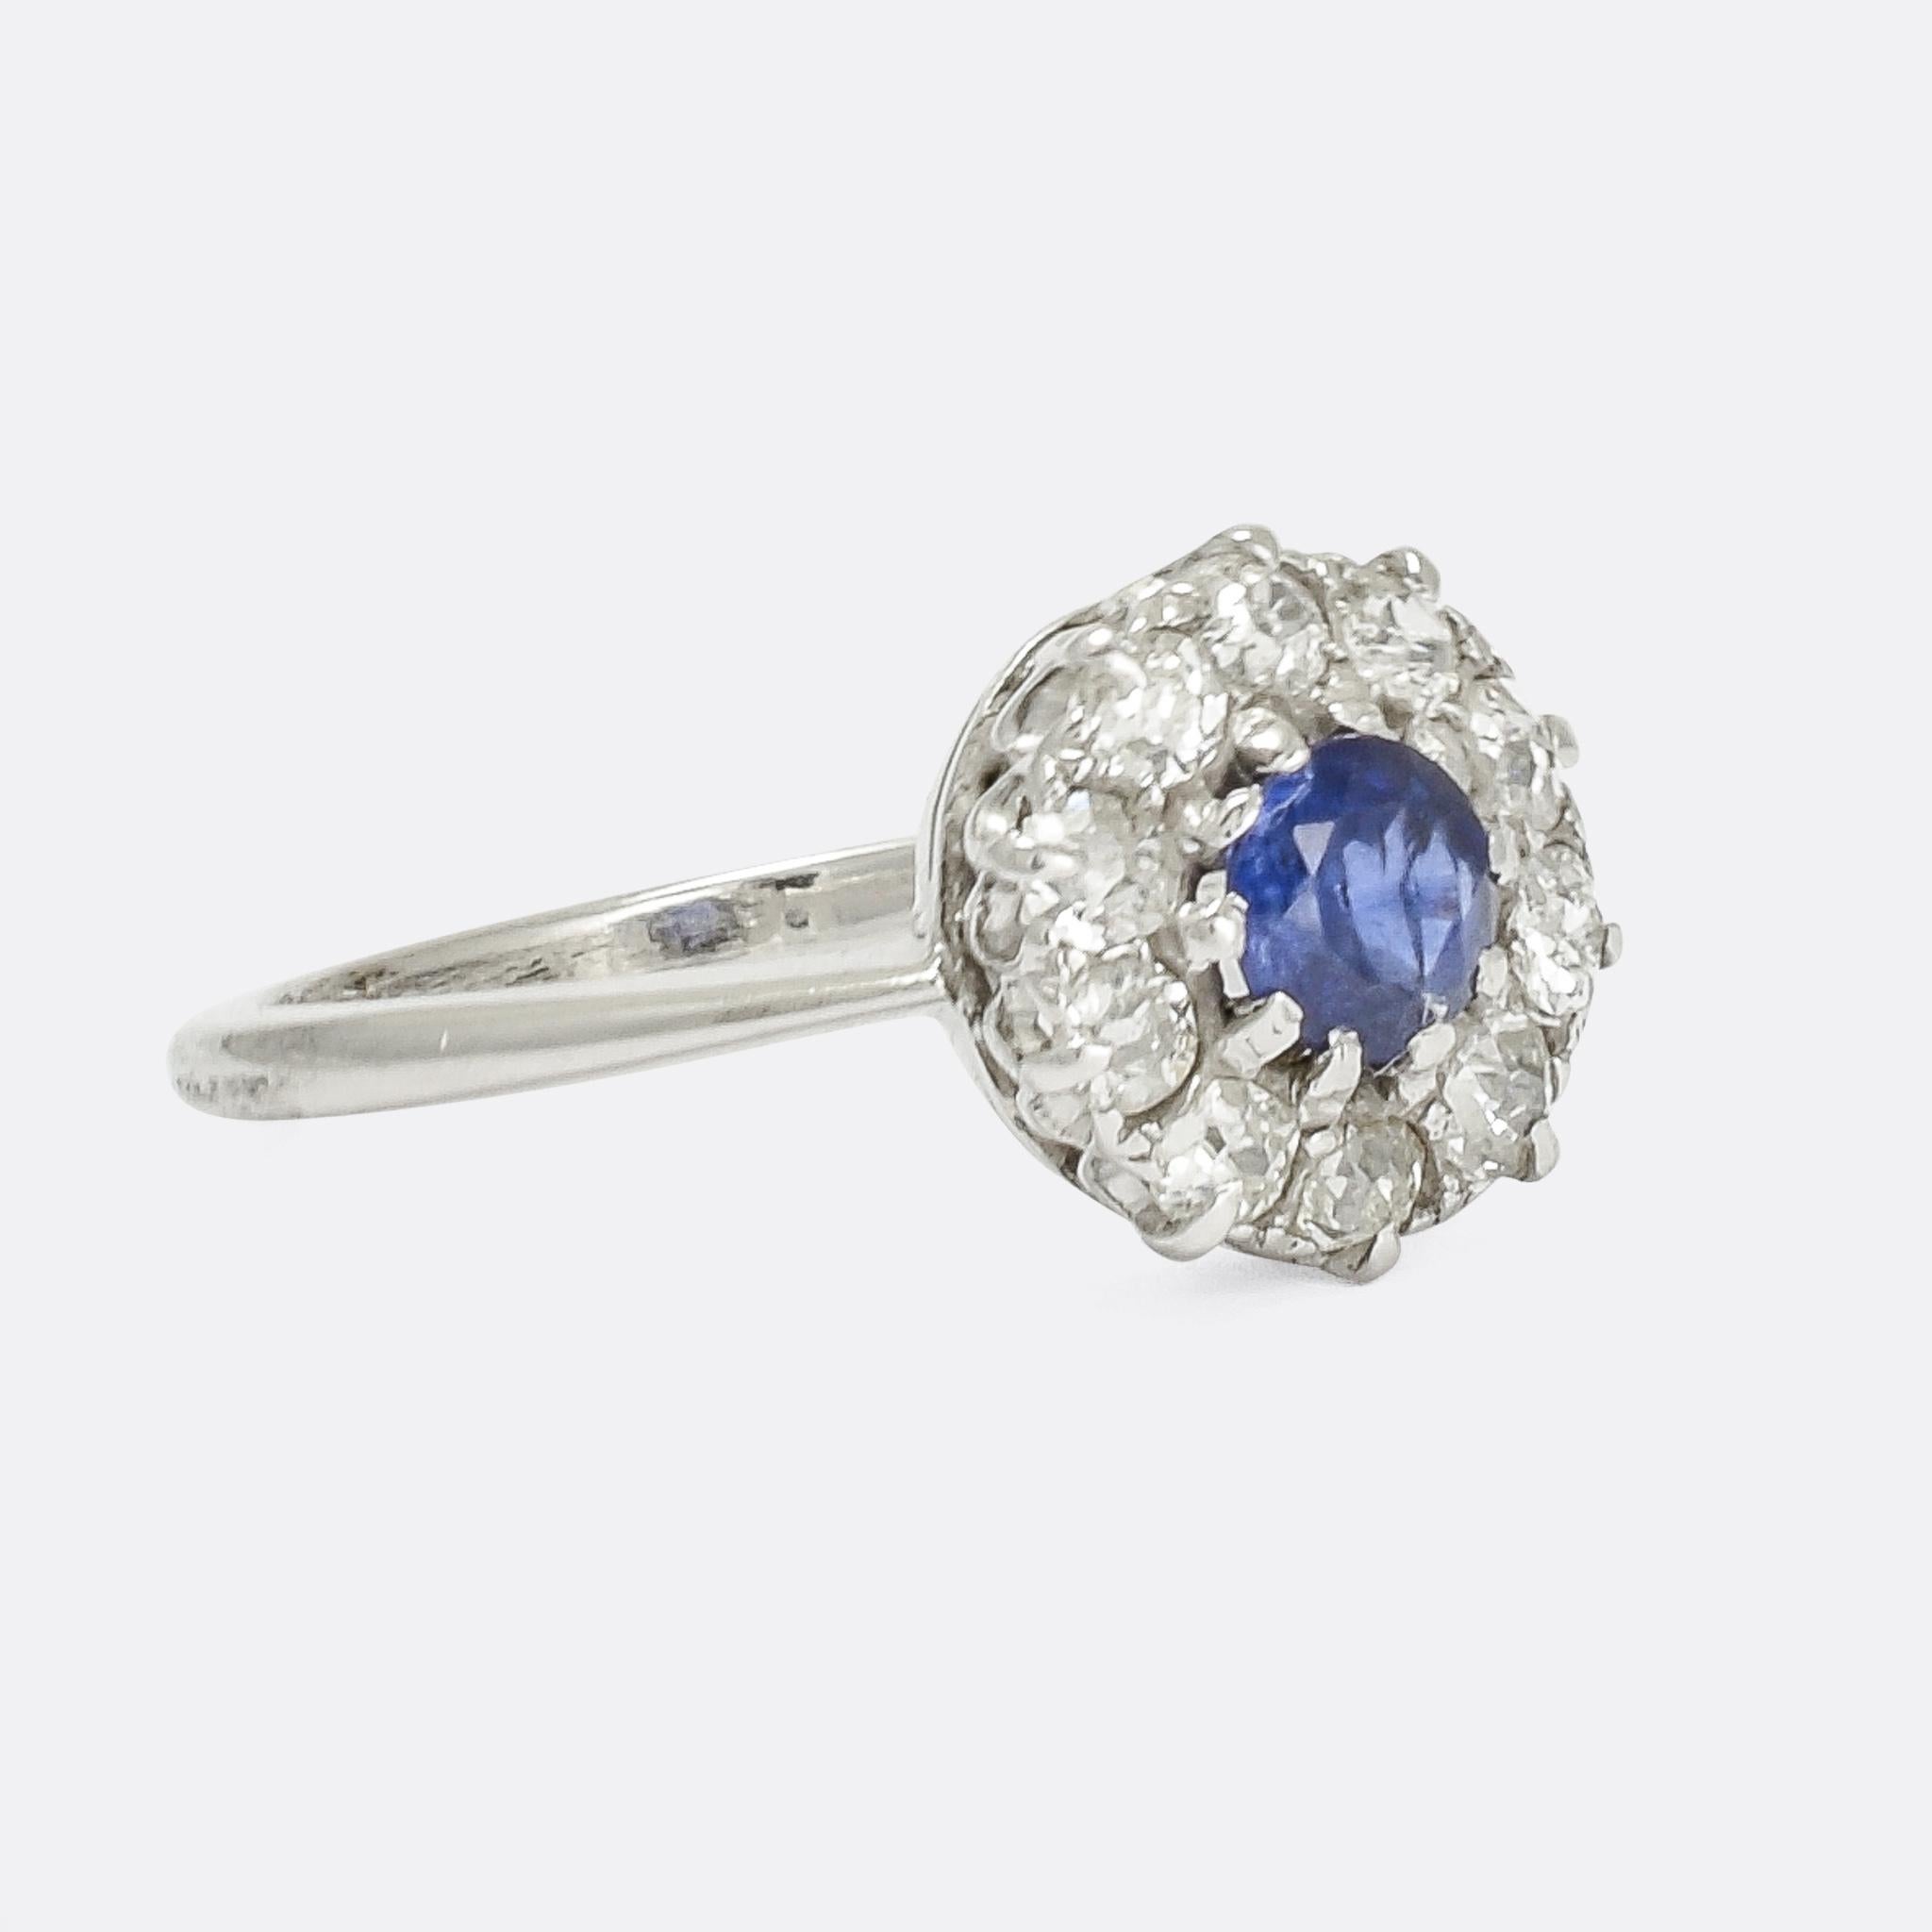 A pretty Edwardian round cluster ring set with a bright central blue sapphire within a halo of old cut diamonds. It dates from the early 20th Century, made around 1910, in 14k white gold with platinum claw settings.

STONES 
Natural Sapphire -